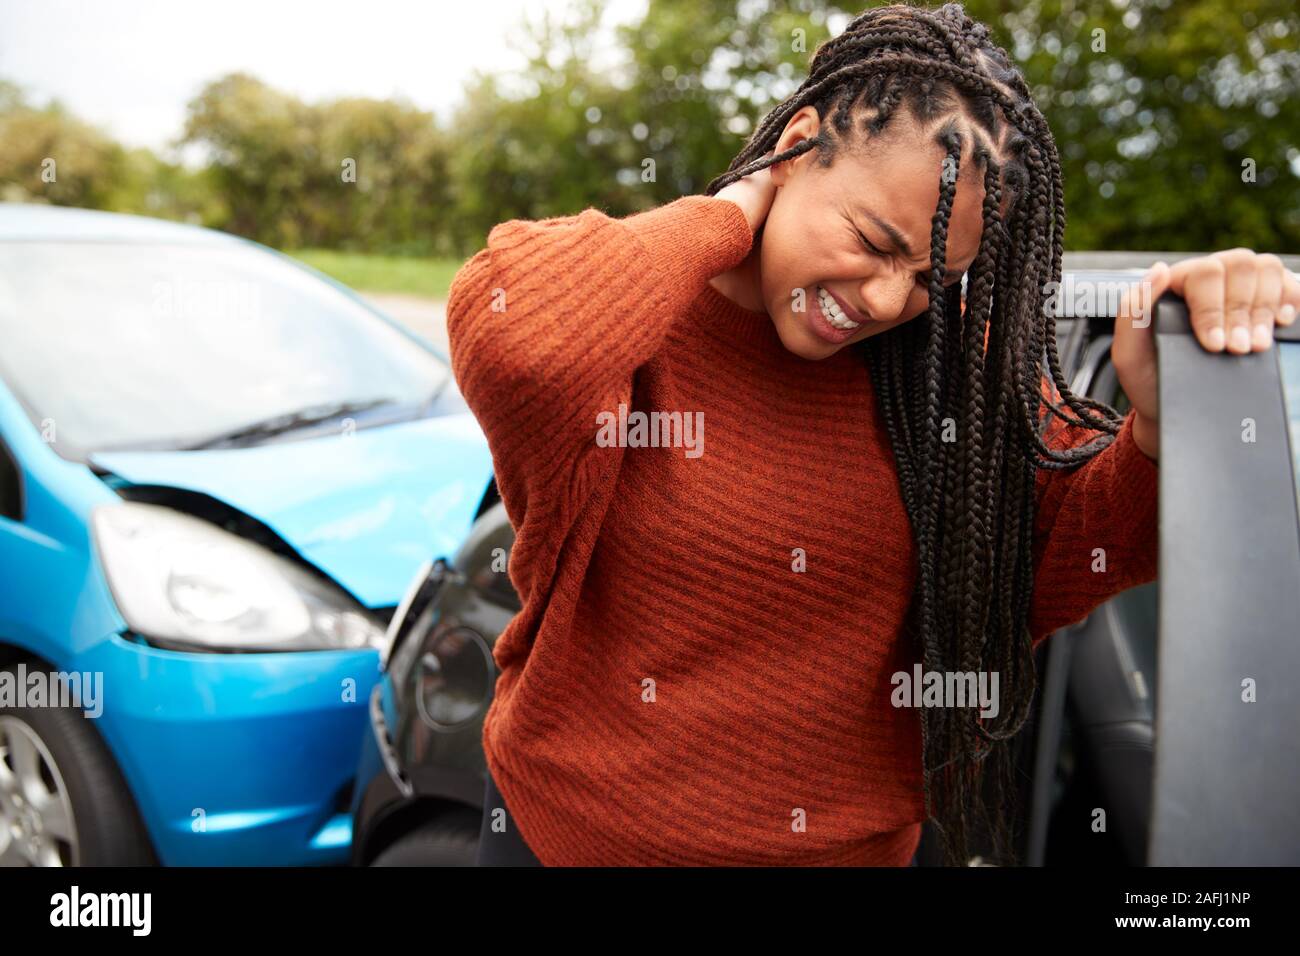 Female Motorist With Whiplash Injury In Car Crash Getting Out Of Vehicle Stock Photo